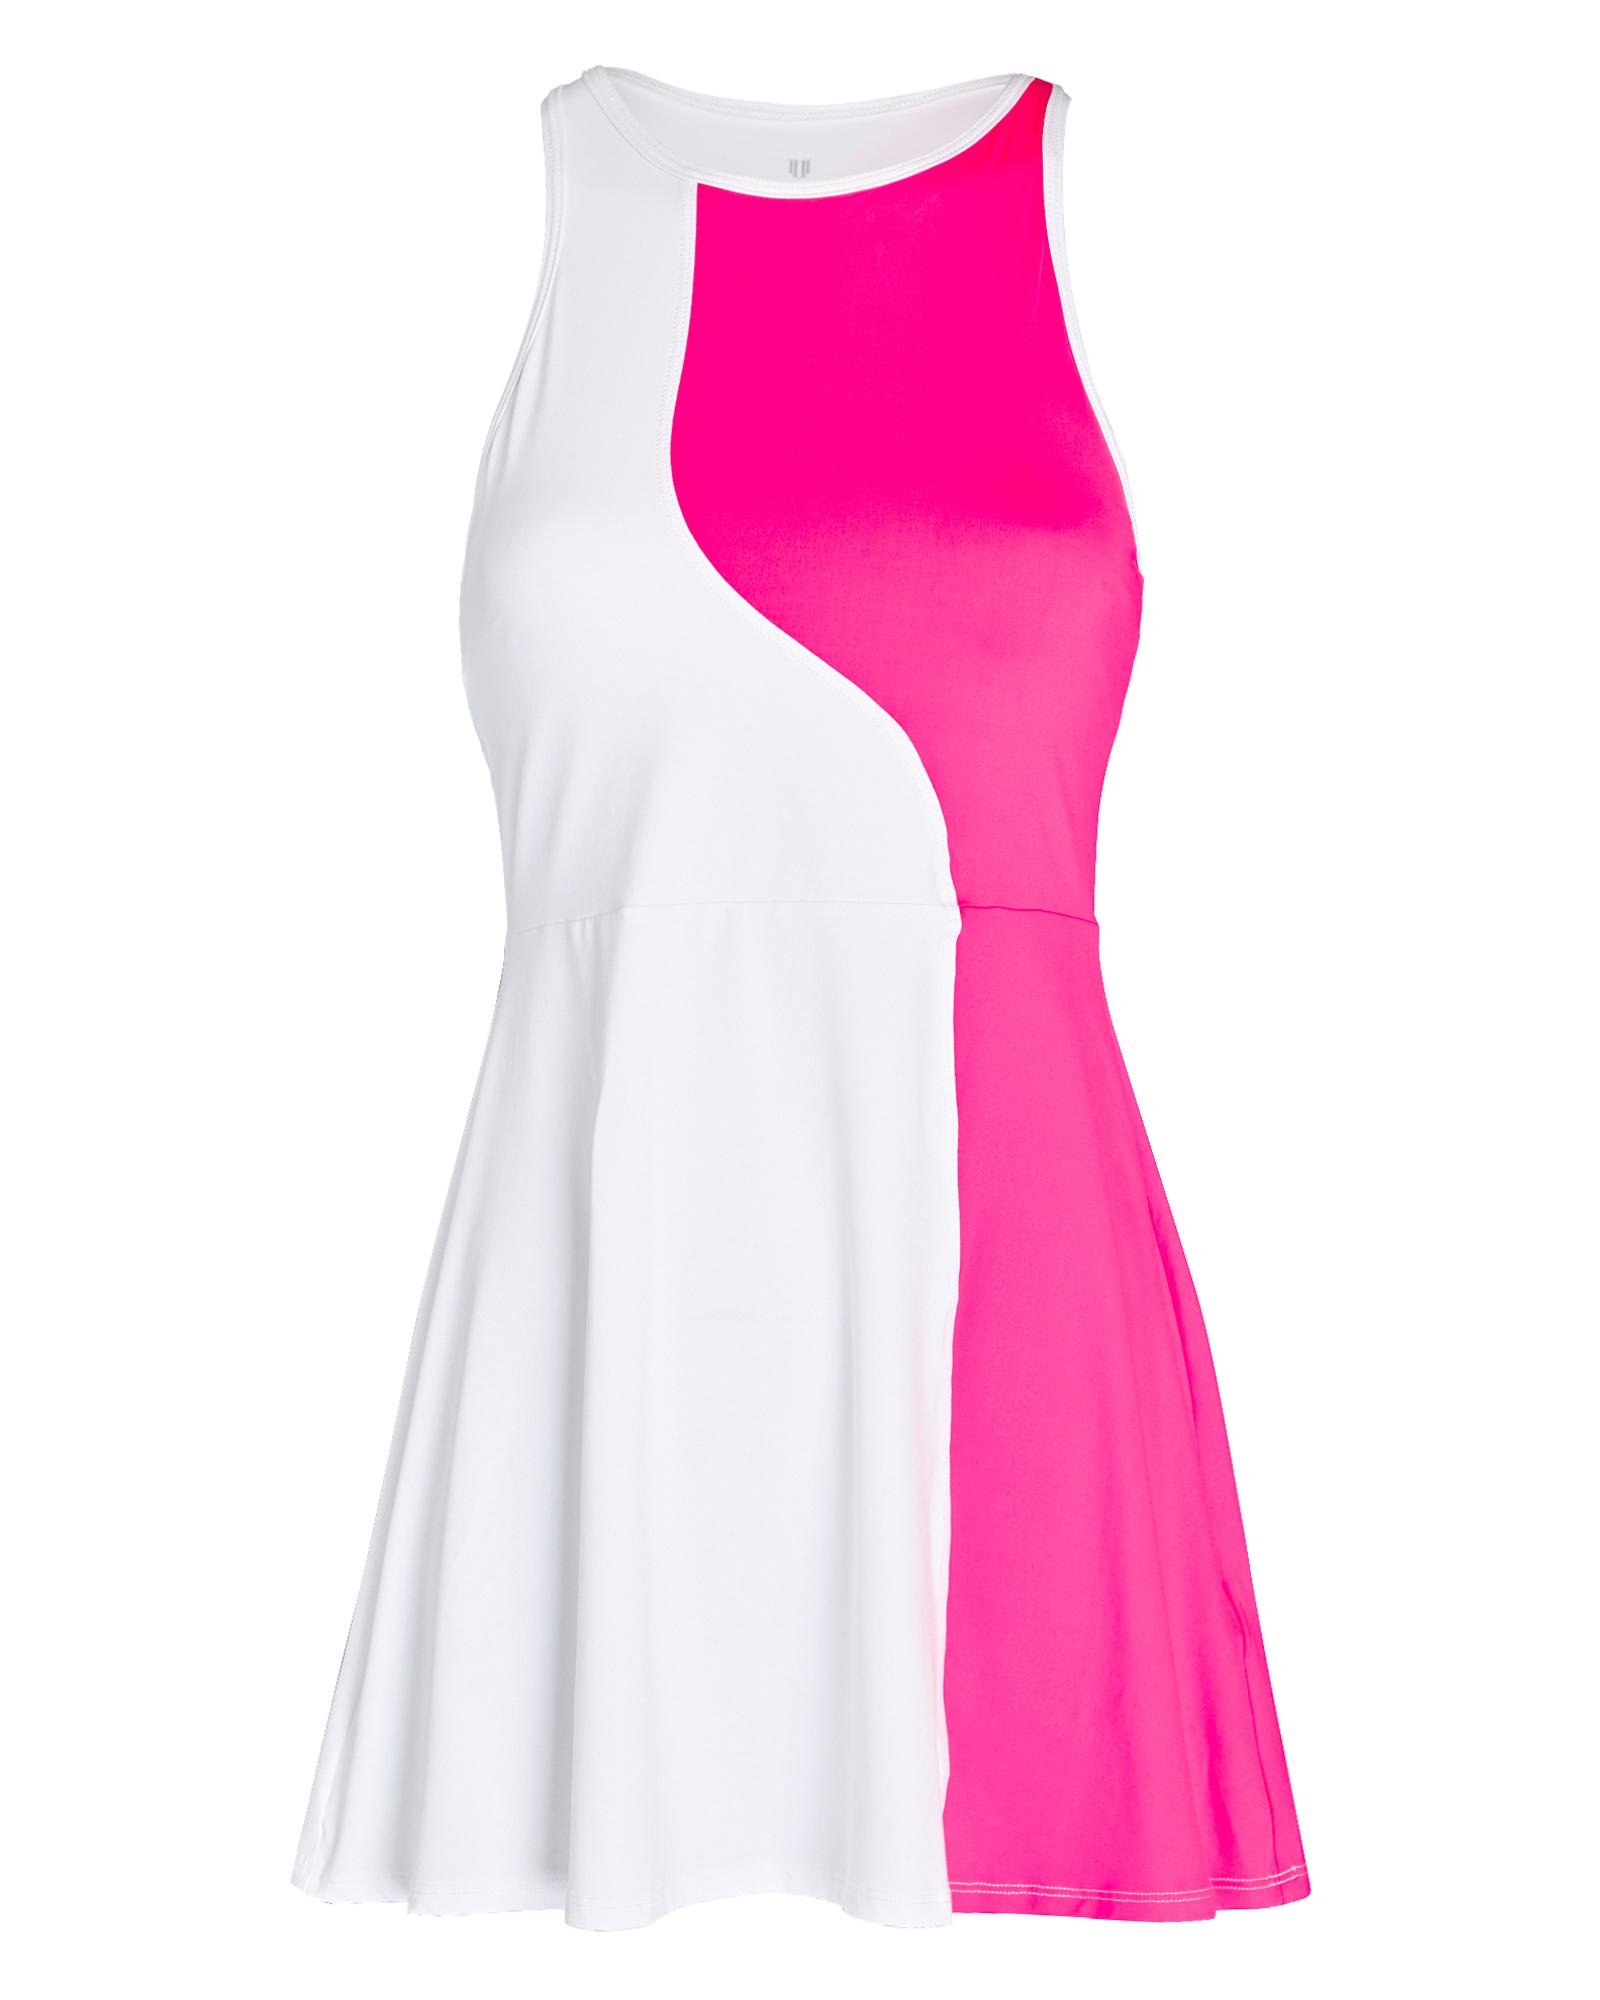 Eleven by Venus Williams Crescent Moon Tennis Dress in Pink | Lyst